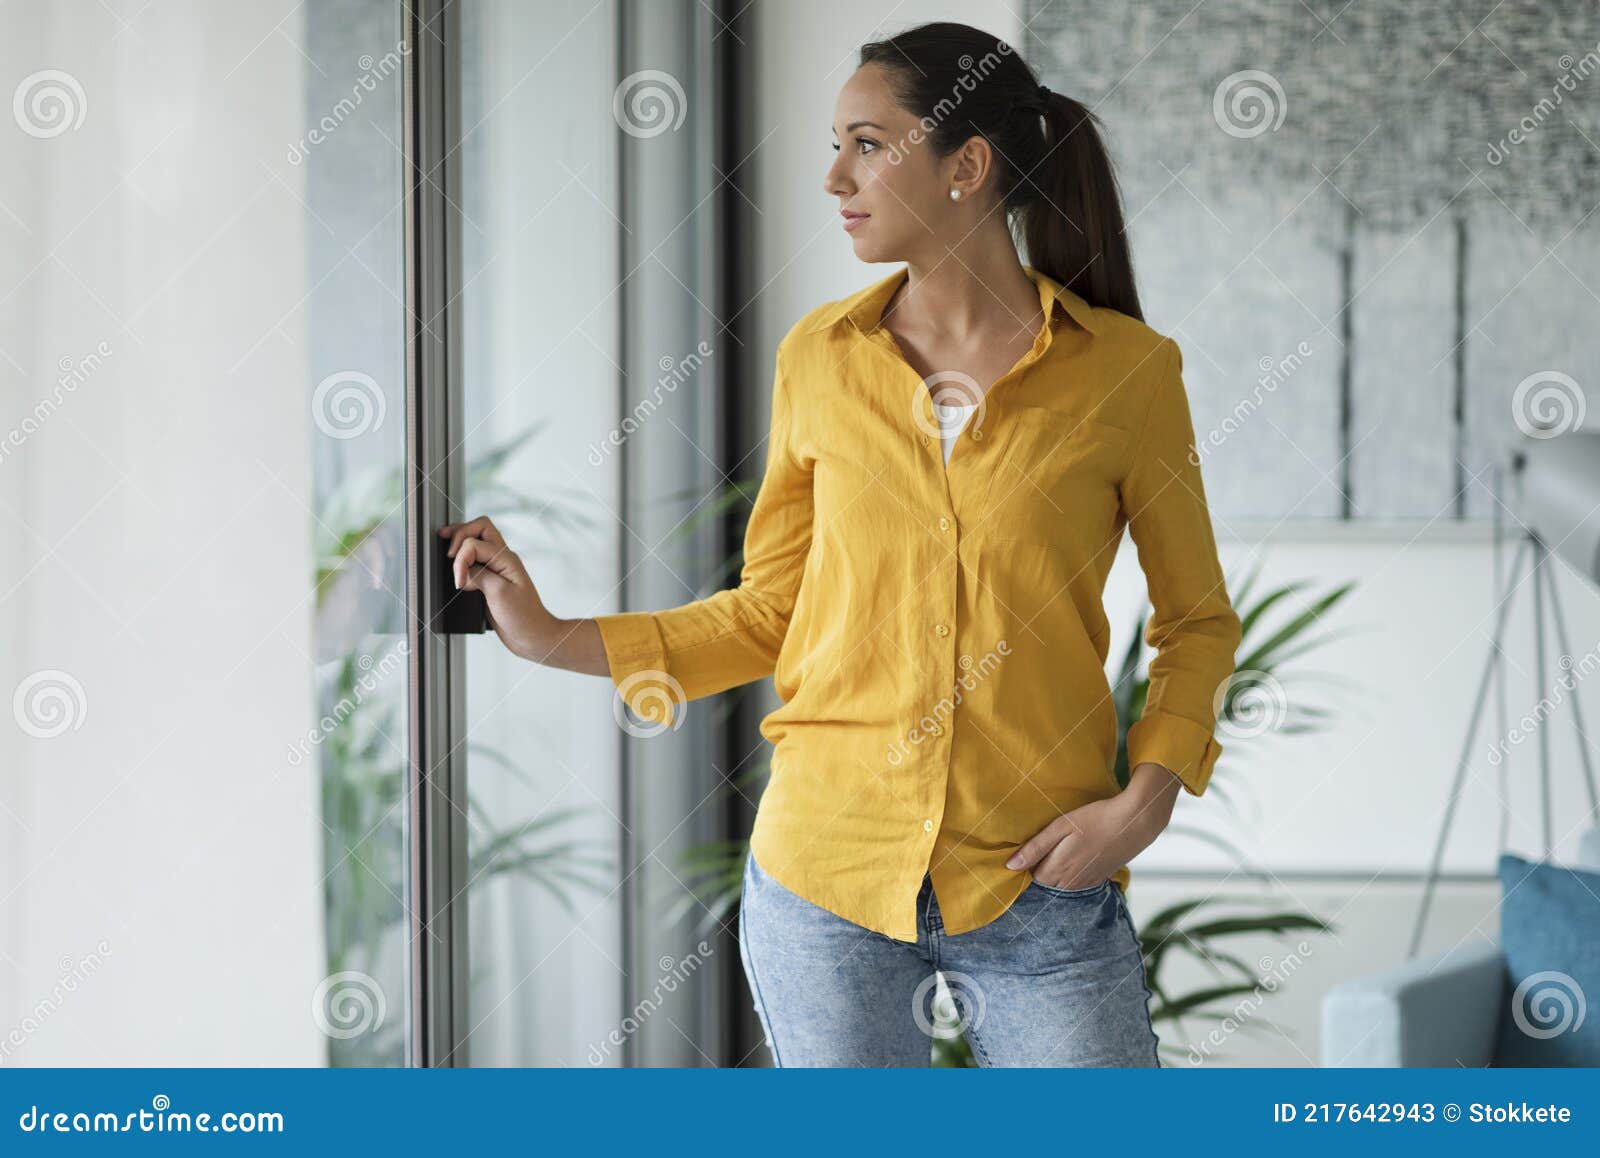 Young Woman Looking Outside the Window Stock Image - Image of relaxing ...